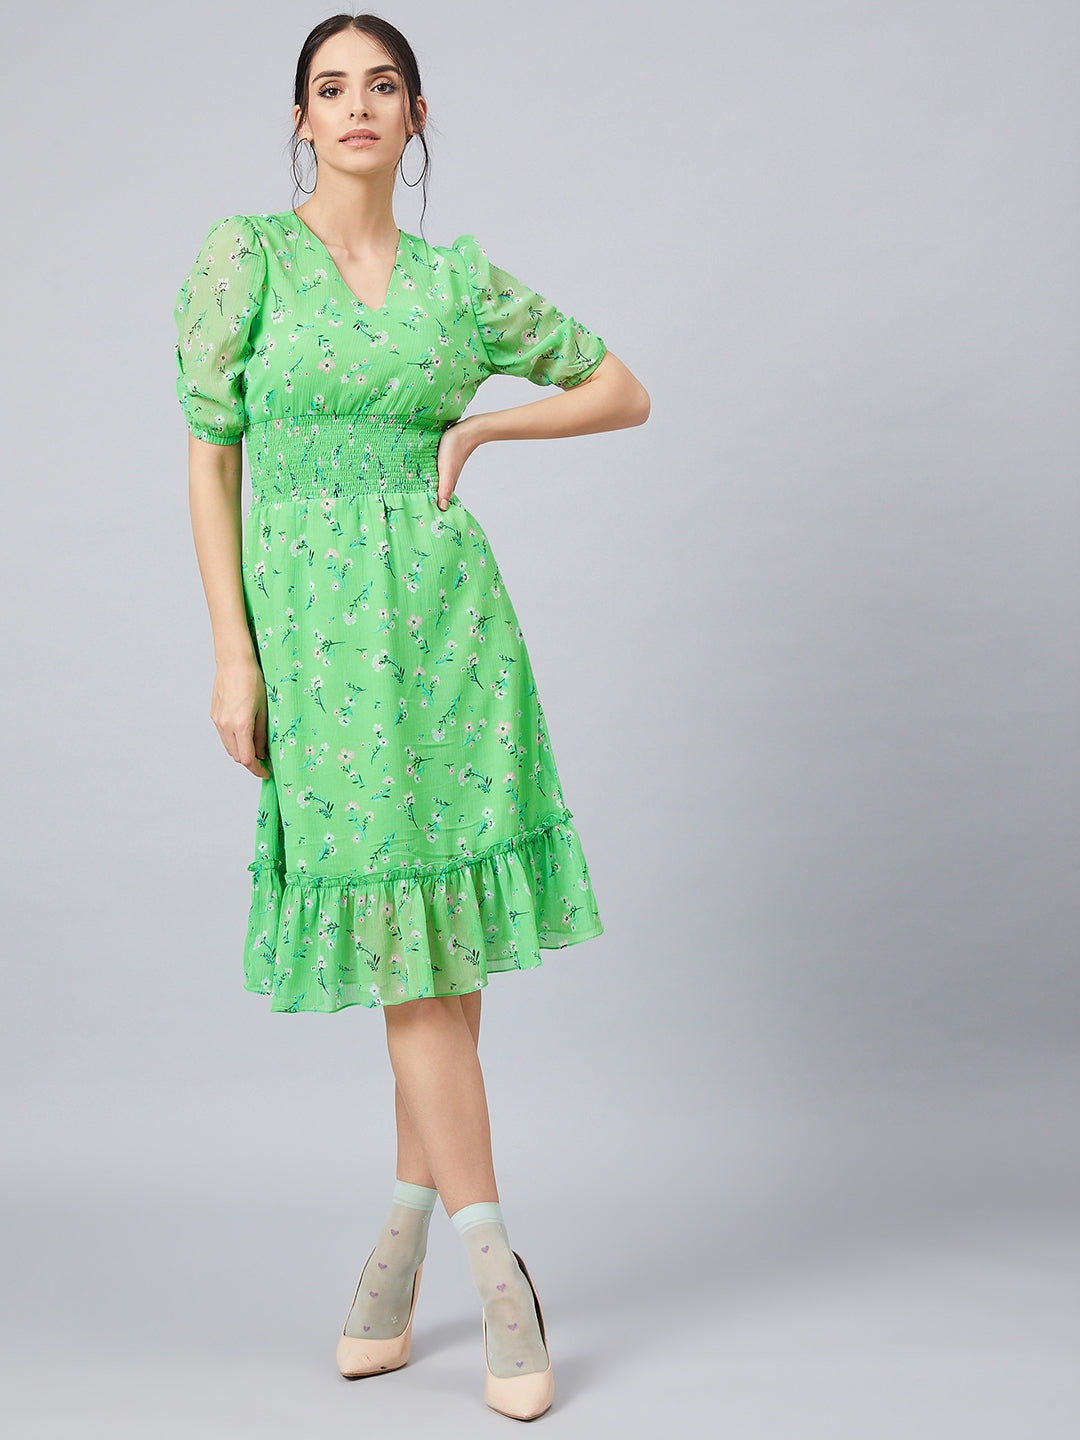 Athena Women Green Printed Fit and Flare Dress - Athena Lifestyle